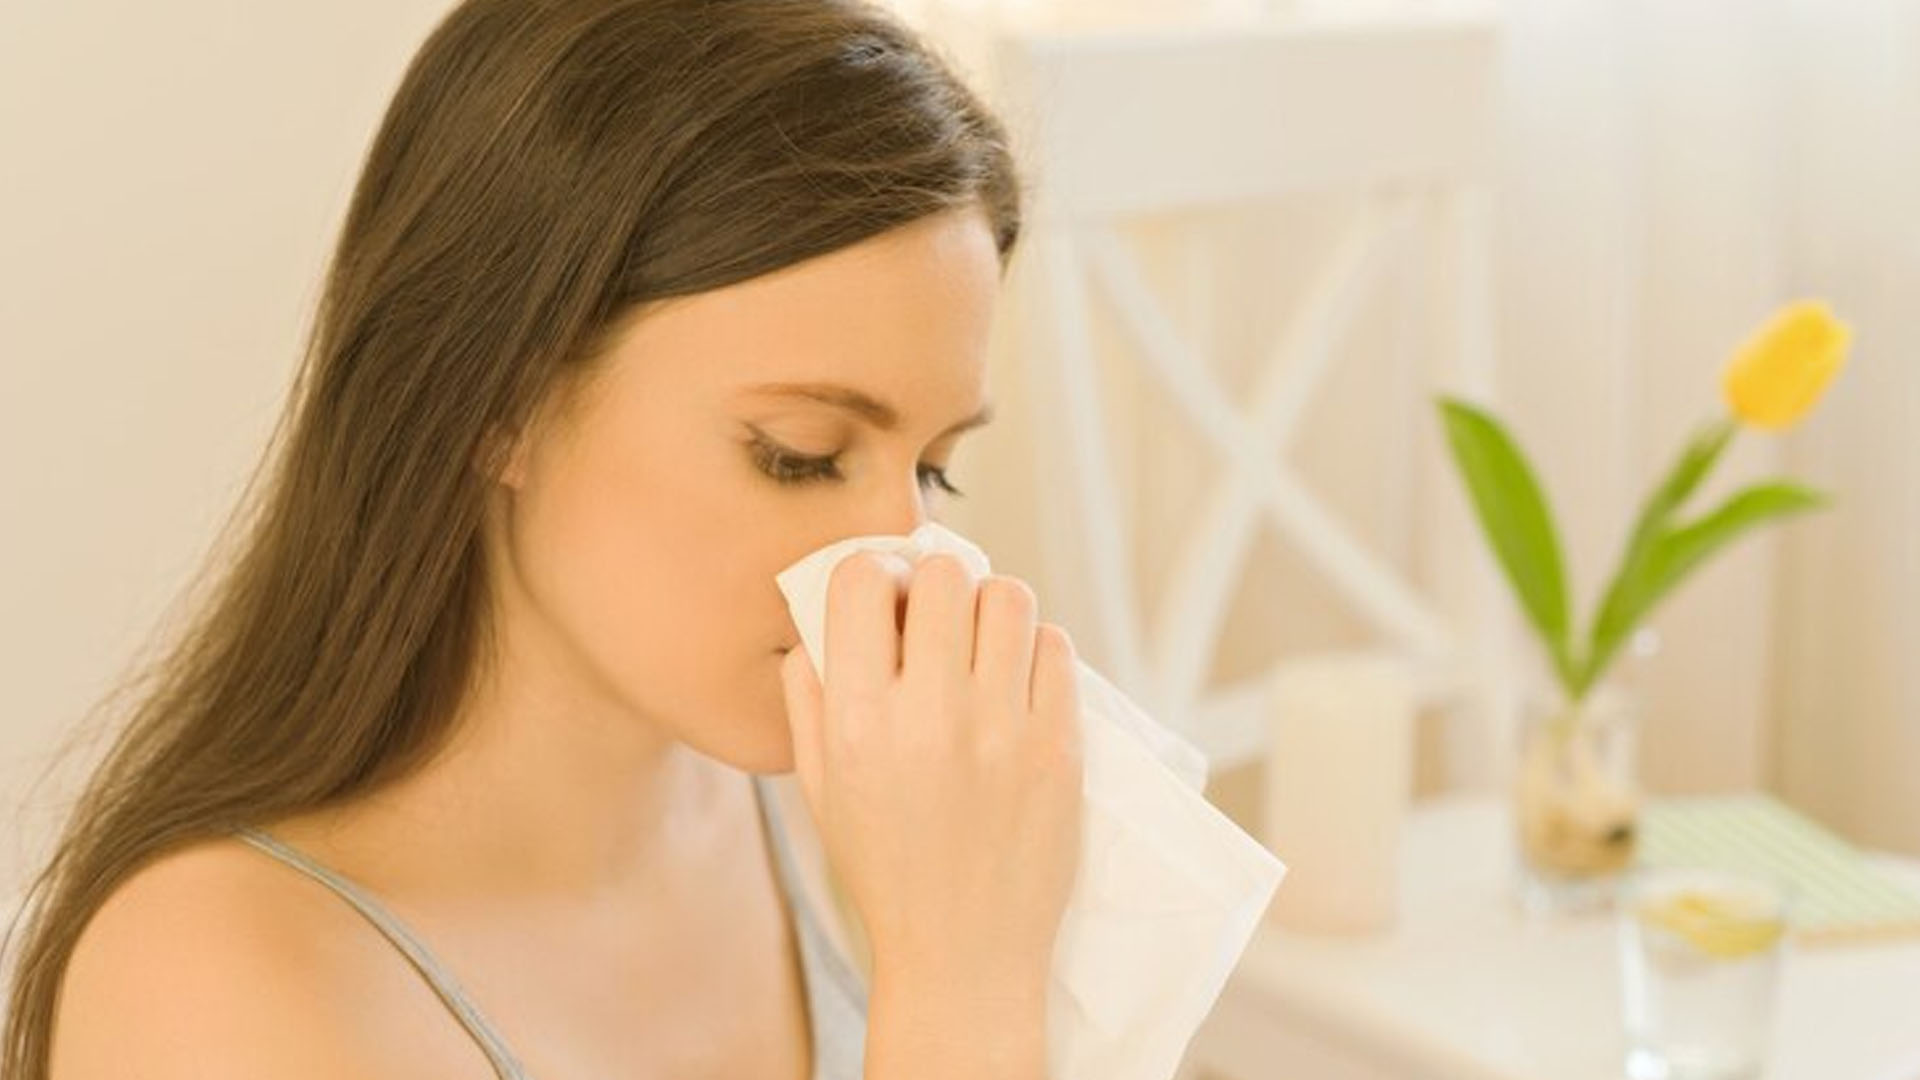 What are the Home Remedies for Nasal Allergies?